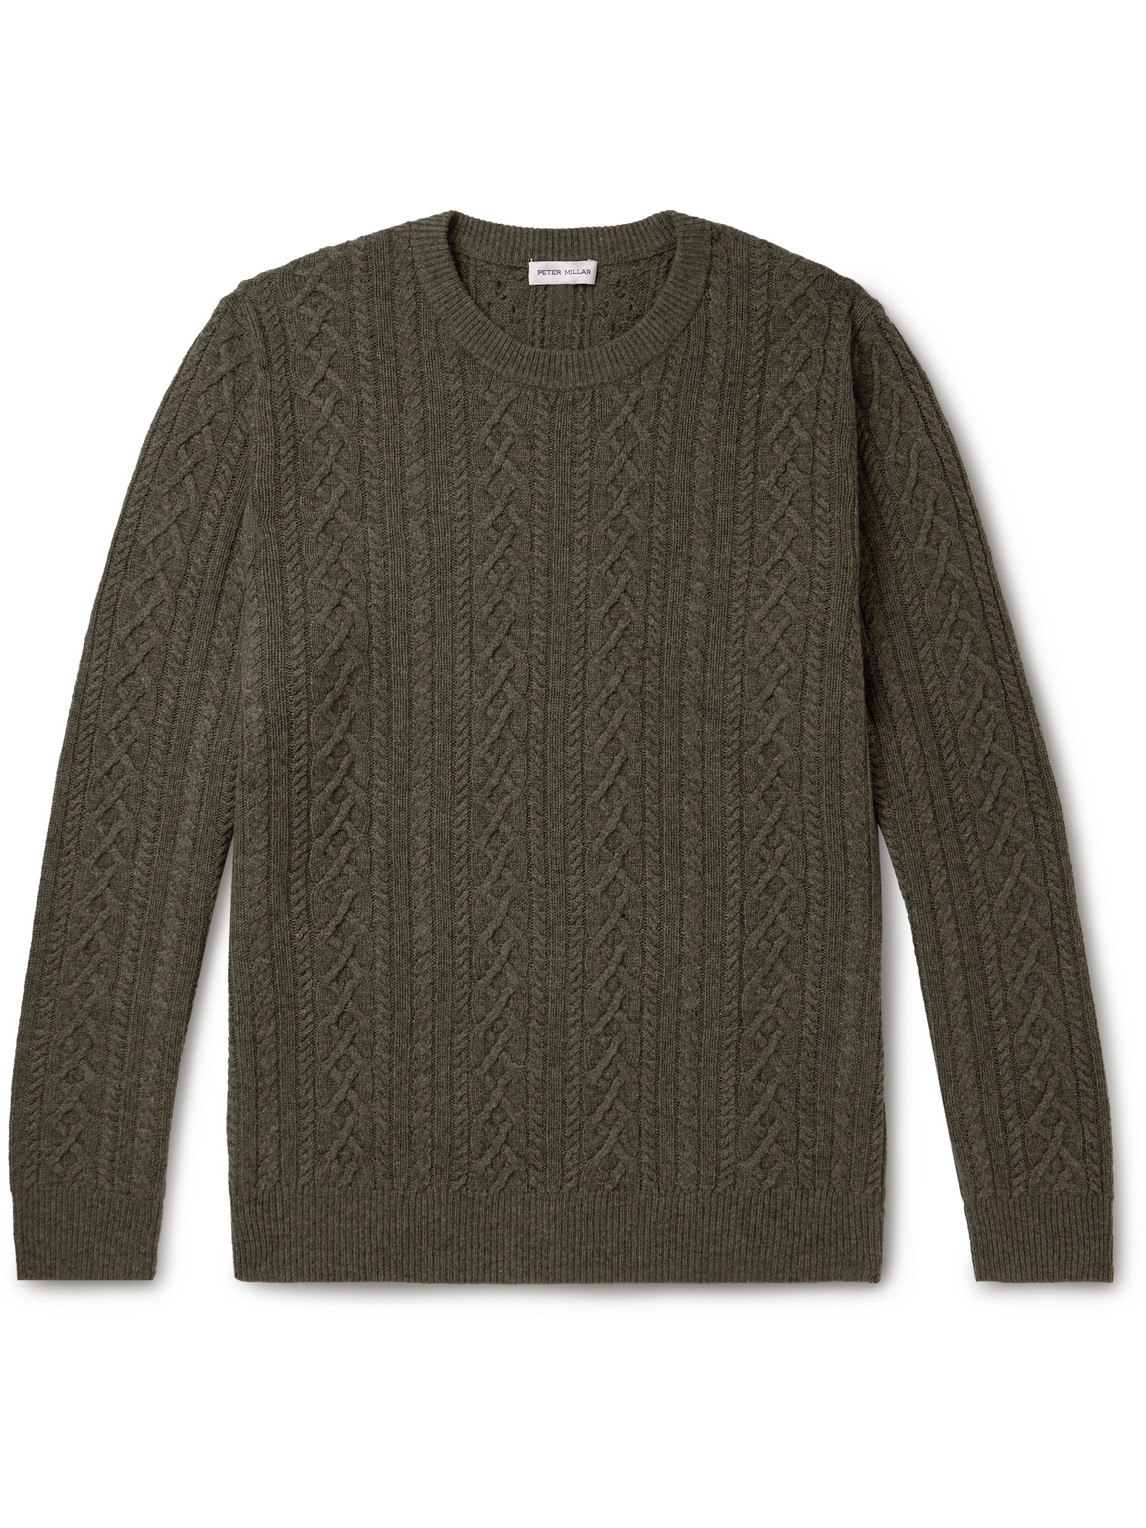 PETER MILLAR RIDGE CABLE-KNIT WOOL, YAK AND CASHMERE-BLEND jumper